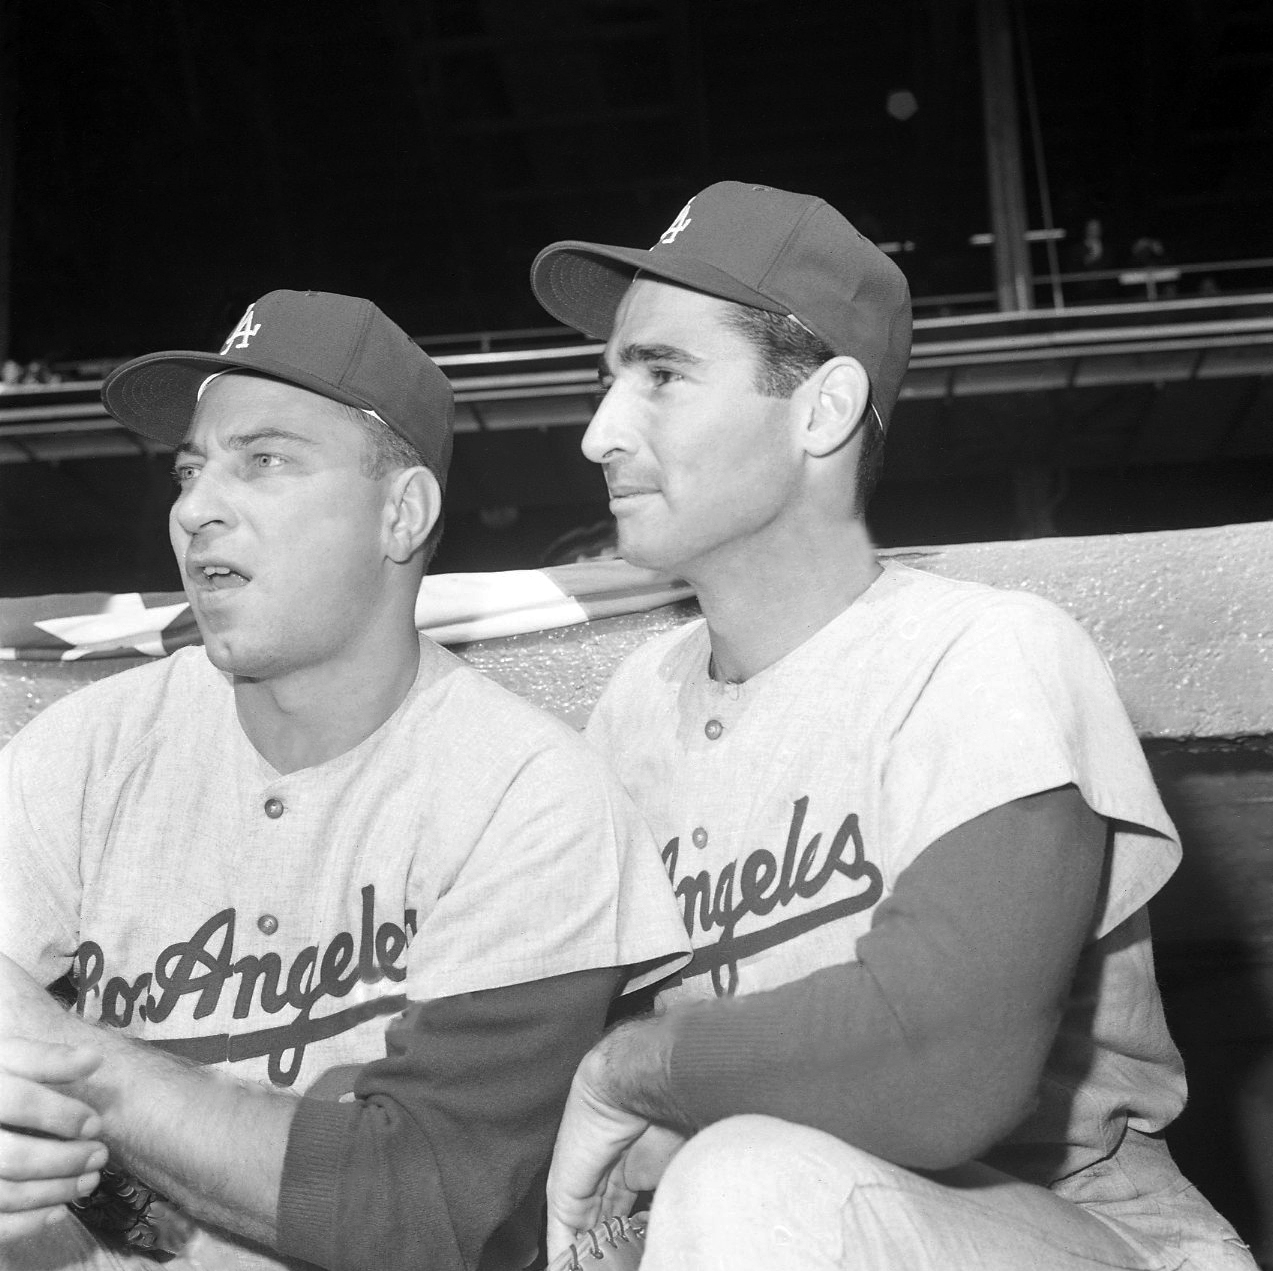 Sandy Koufax and Johnny Podres combined for three wins in the Dodgers’ five games this week in 1963.